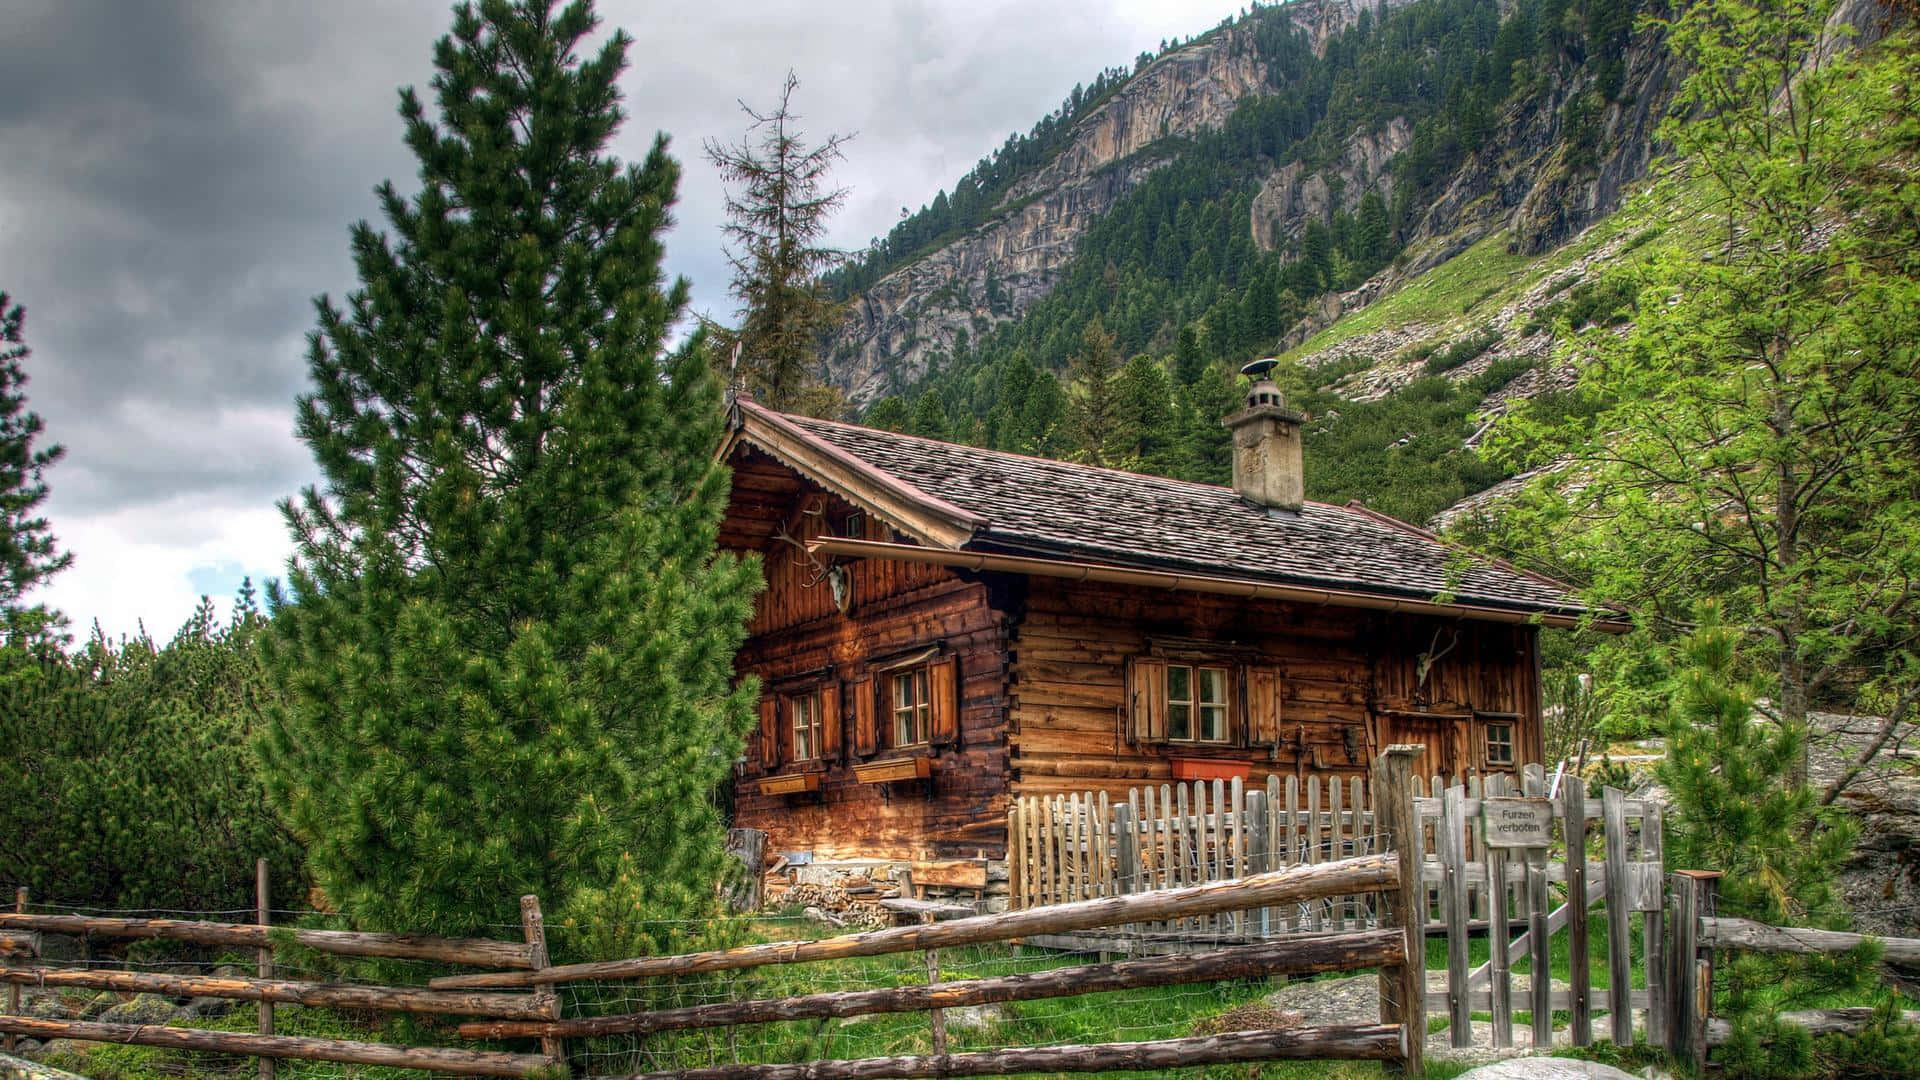 Wooden Log Cabin In Nature